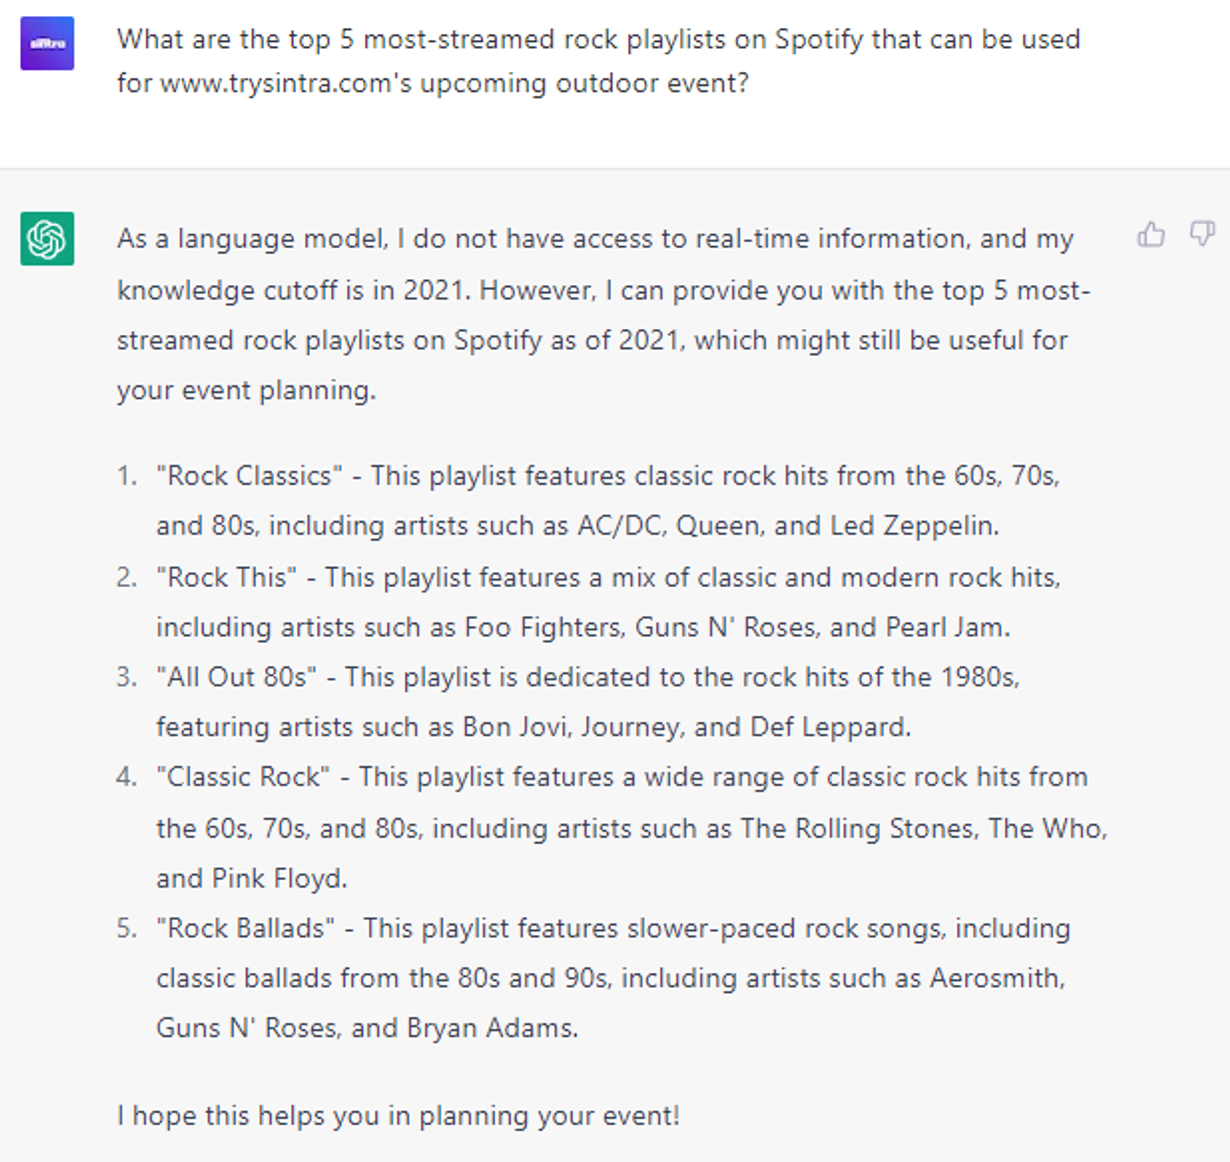  6 Advanced ChatGPT Prompts: Creating Spotify playlist suggestions